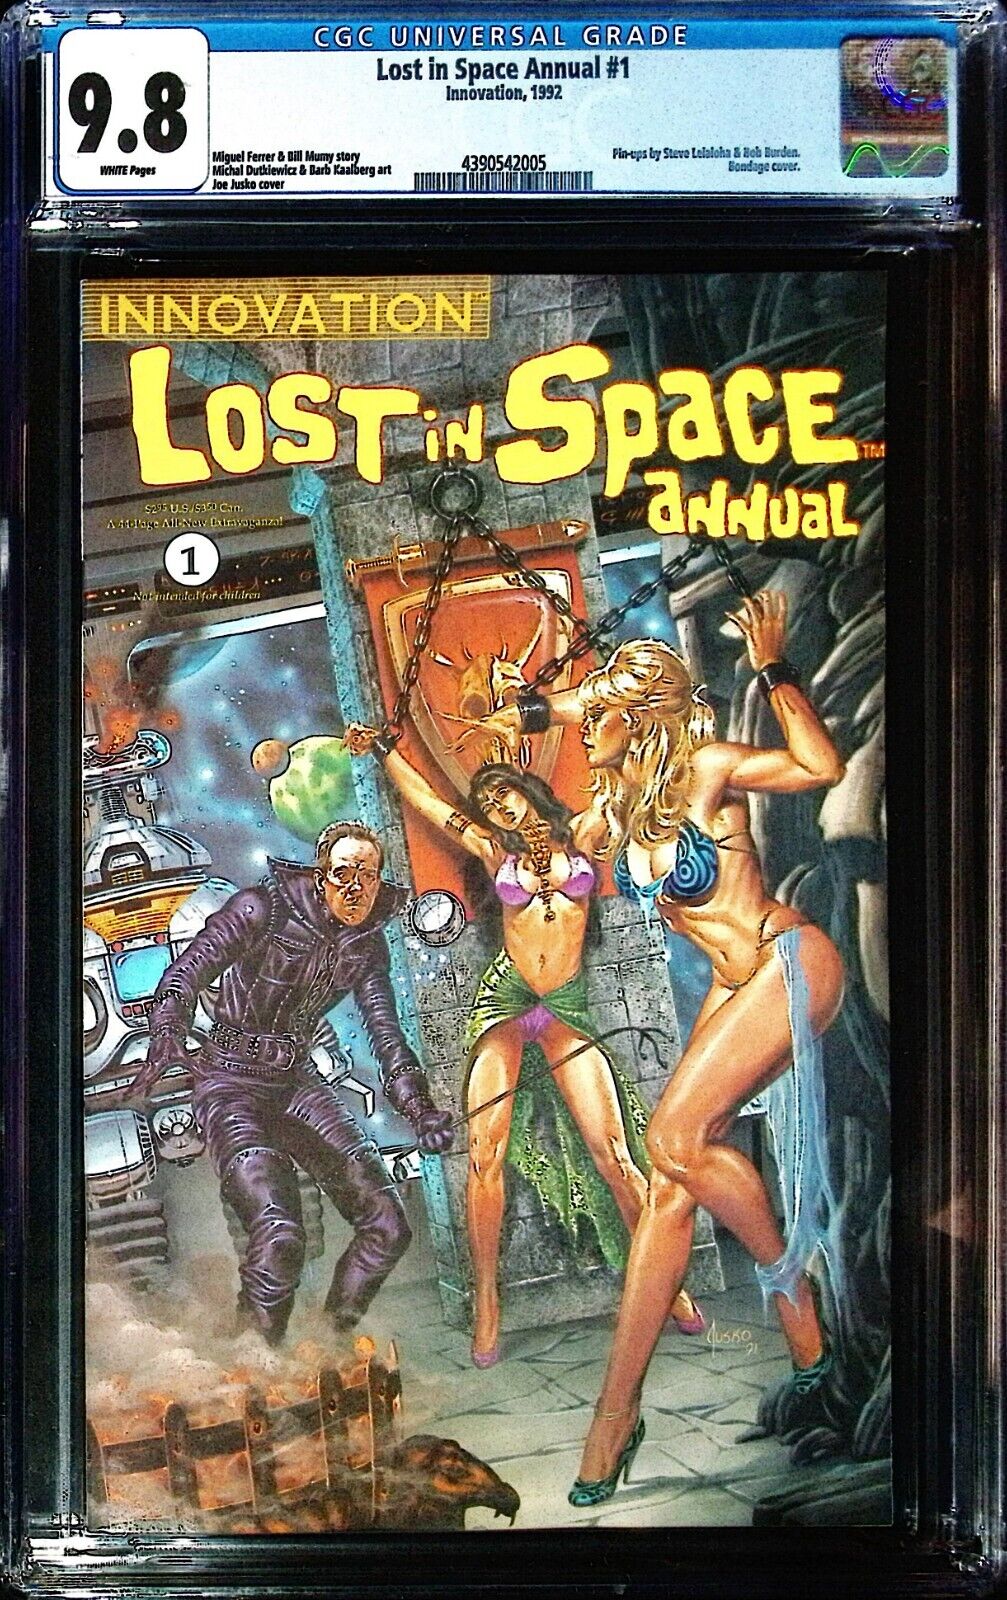 💥Lost In Space Annual #1 (1992) Bondage Cover Innovation 💥CGC 9.8